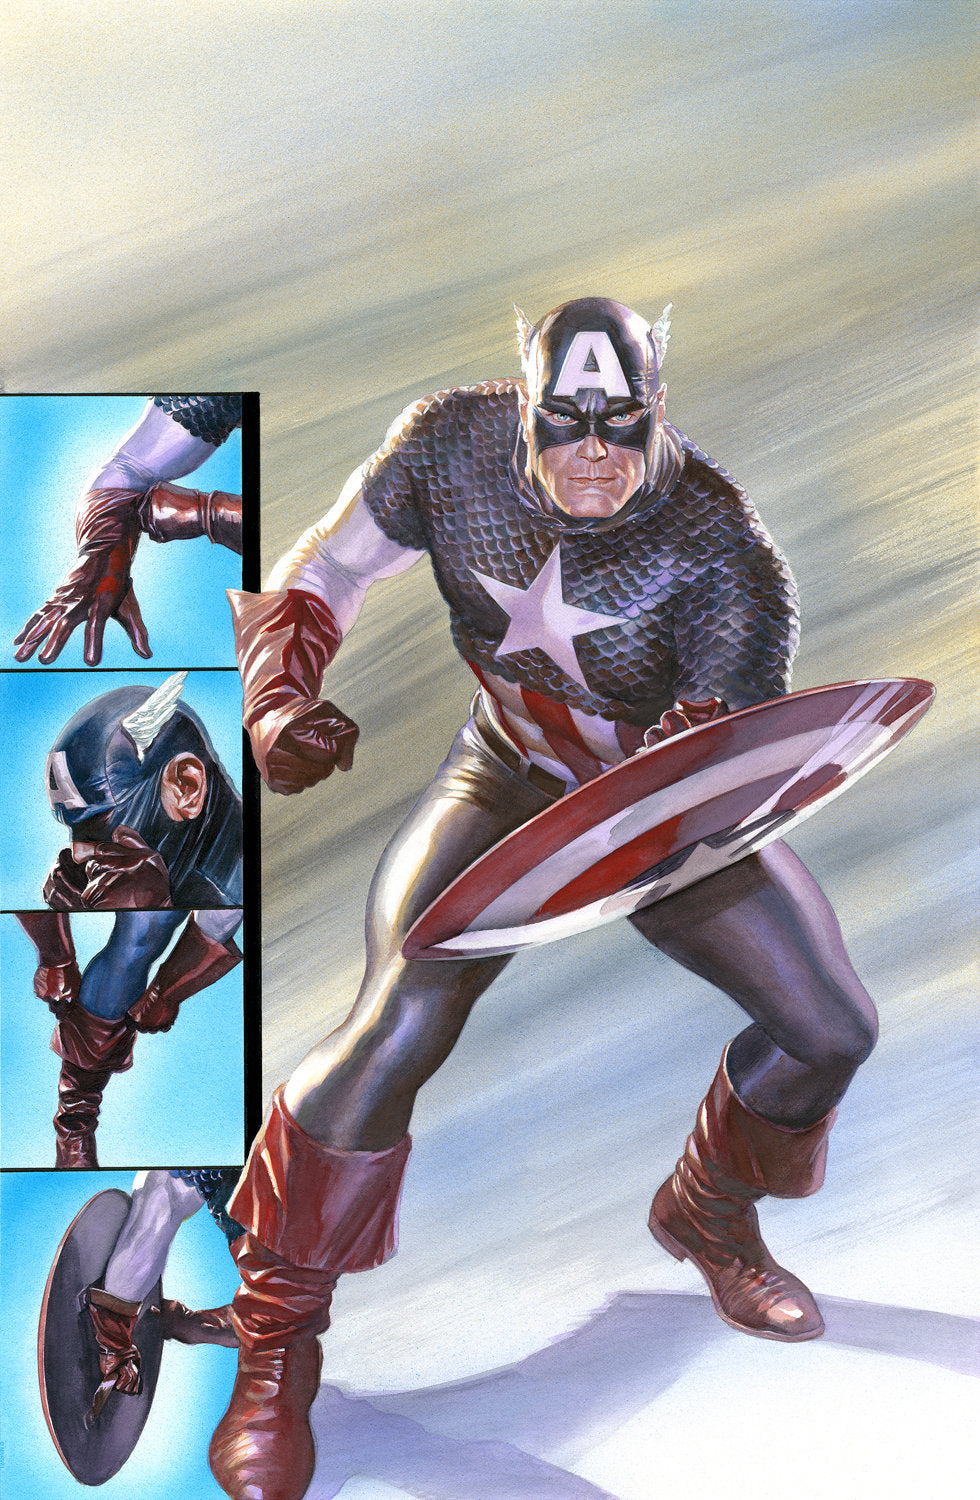 Alex Ross SIGNED Captain America Ready for Battle Giclee on Paper Limited Edition of 25 PP Version